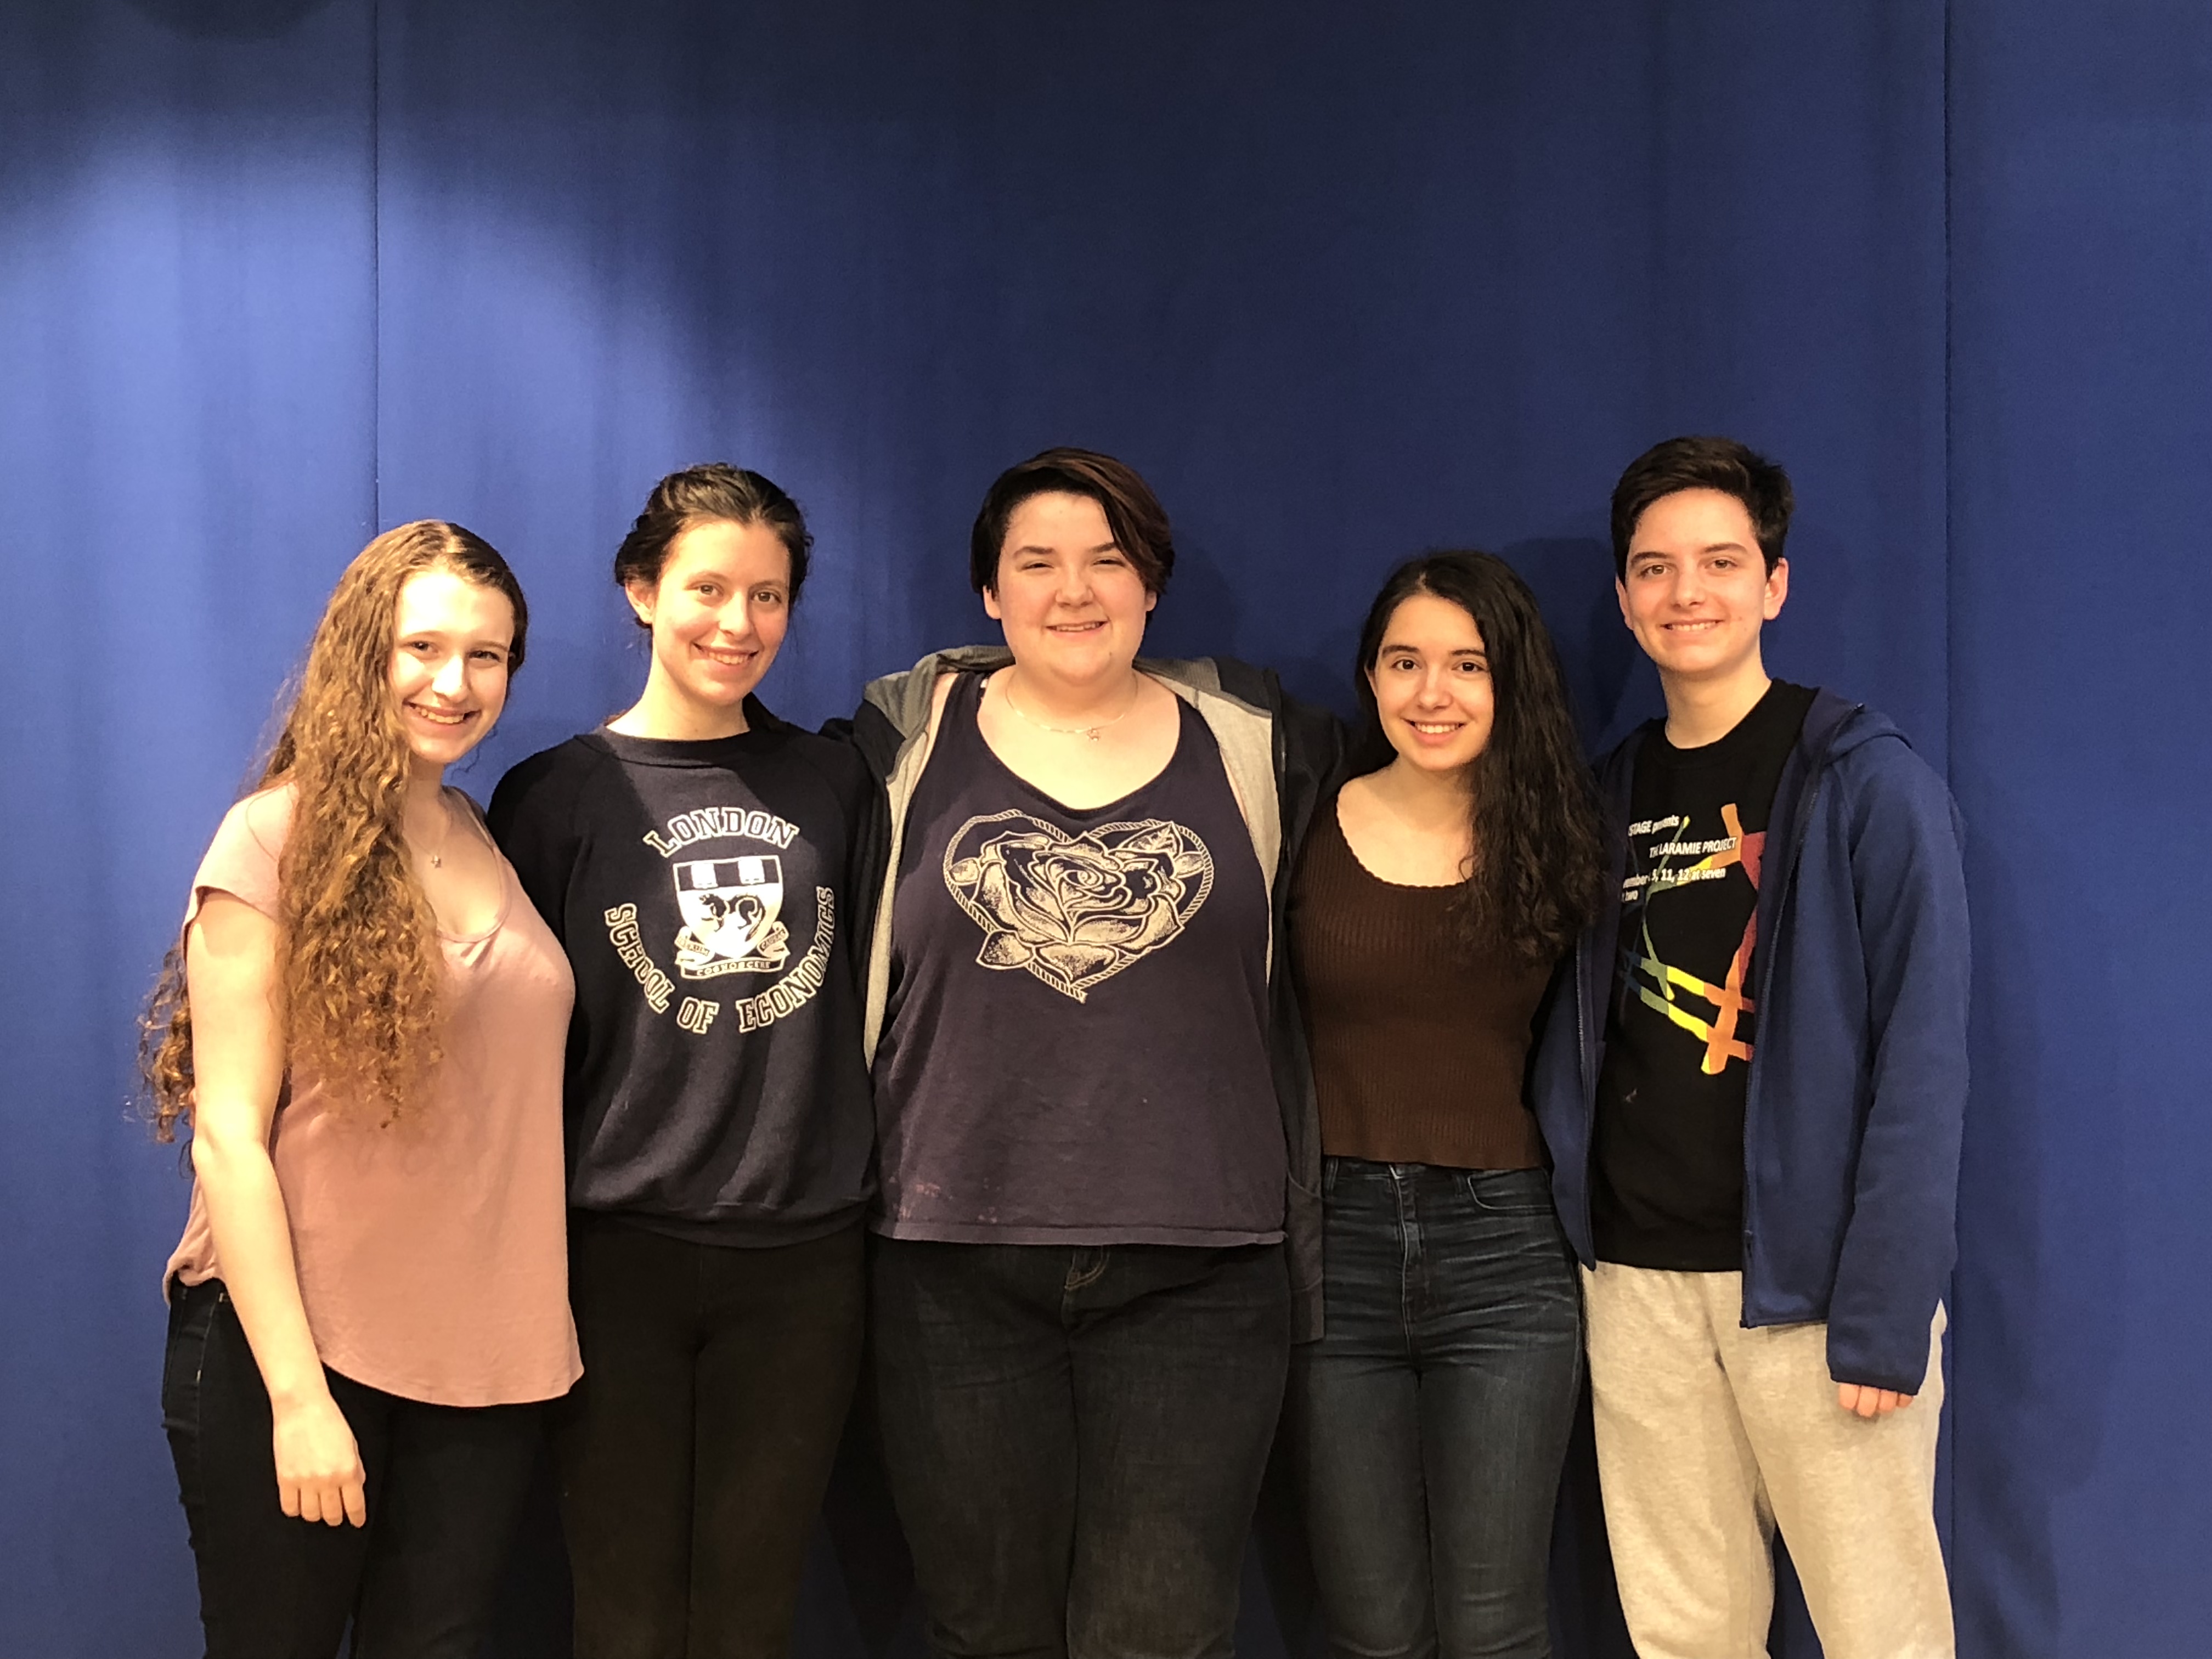 These young activists have organized a home-sharing network in Maryland to help their out-of-town peers find places to stay during the March For Our Lives demonstration in Washington, D.C. on March 24, 2018. From left to right: Michaela Hoenig, Kate Lebrun, Mai Canning, Gabrielle Zwi and Emiliano Calvo Alcaniz (Photo courtesy Emiliano Calvo Alcaniz)